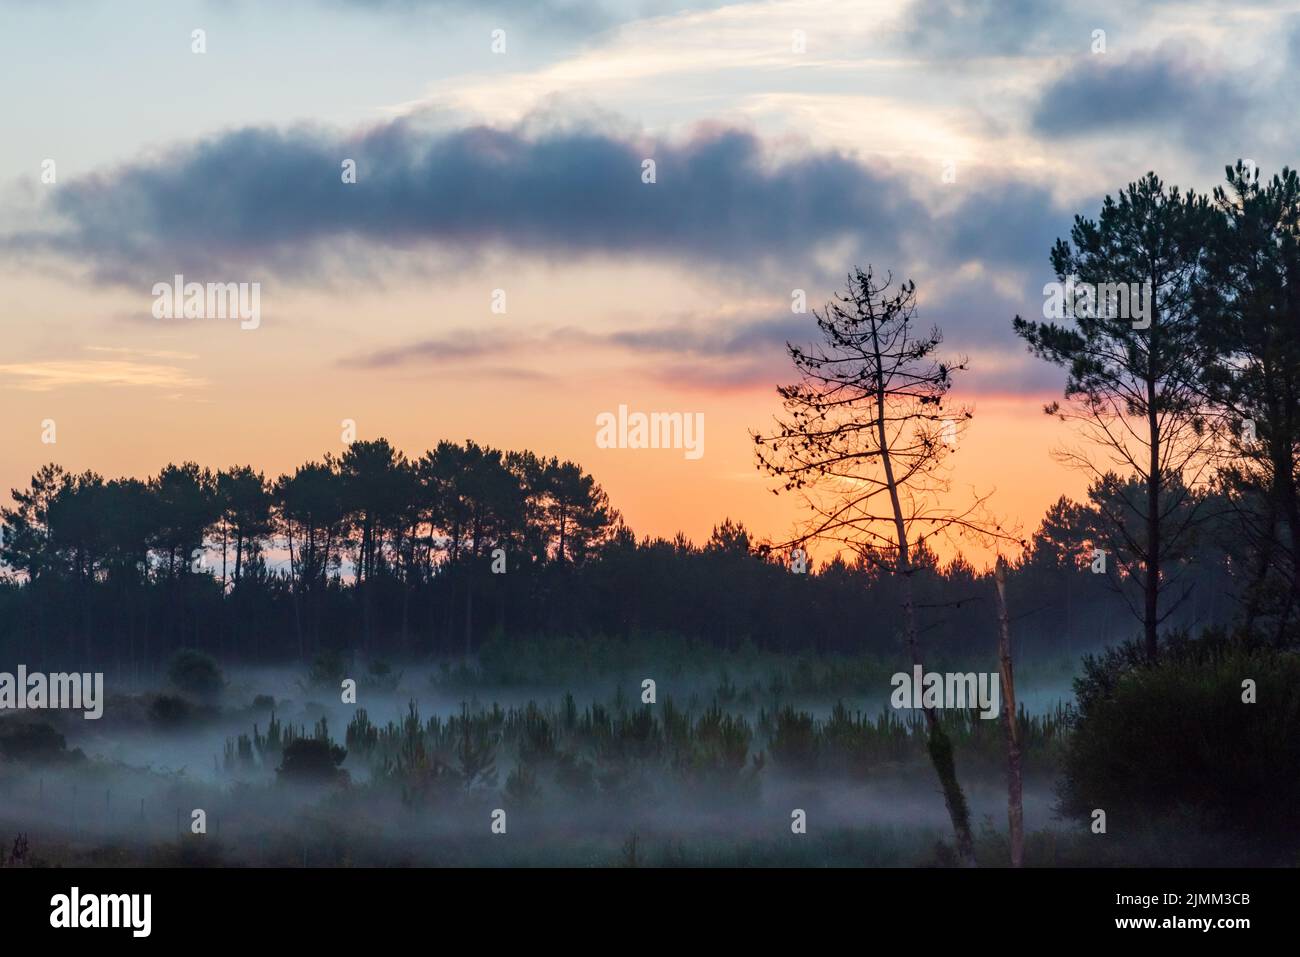 Landscape of a forest at dawn between mists and a dramatic sky. Stock Photo